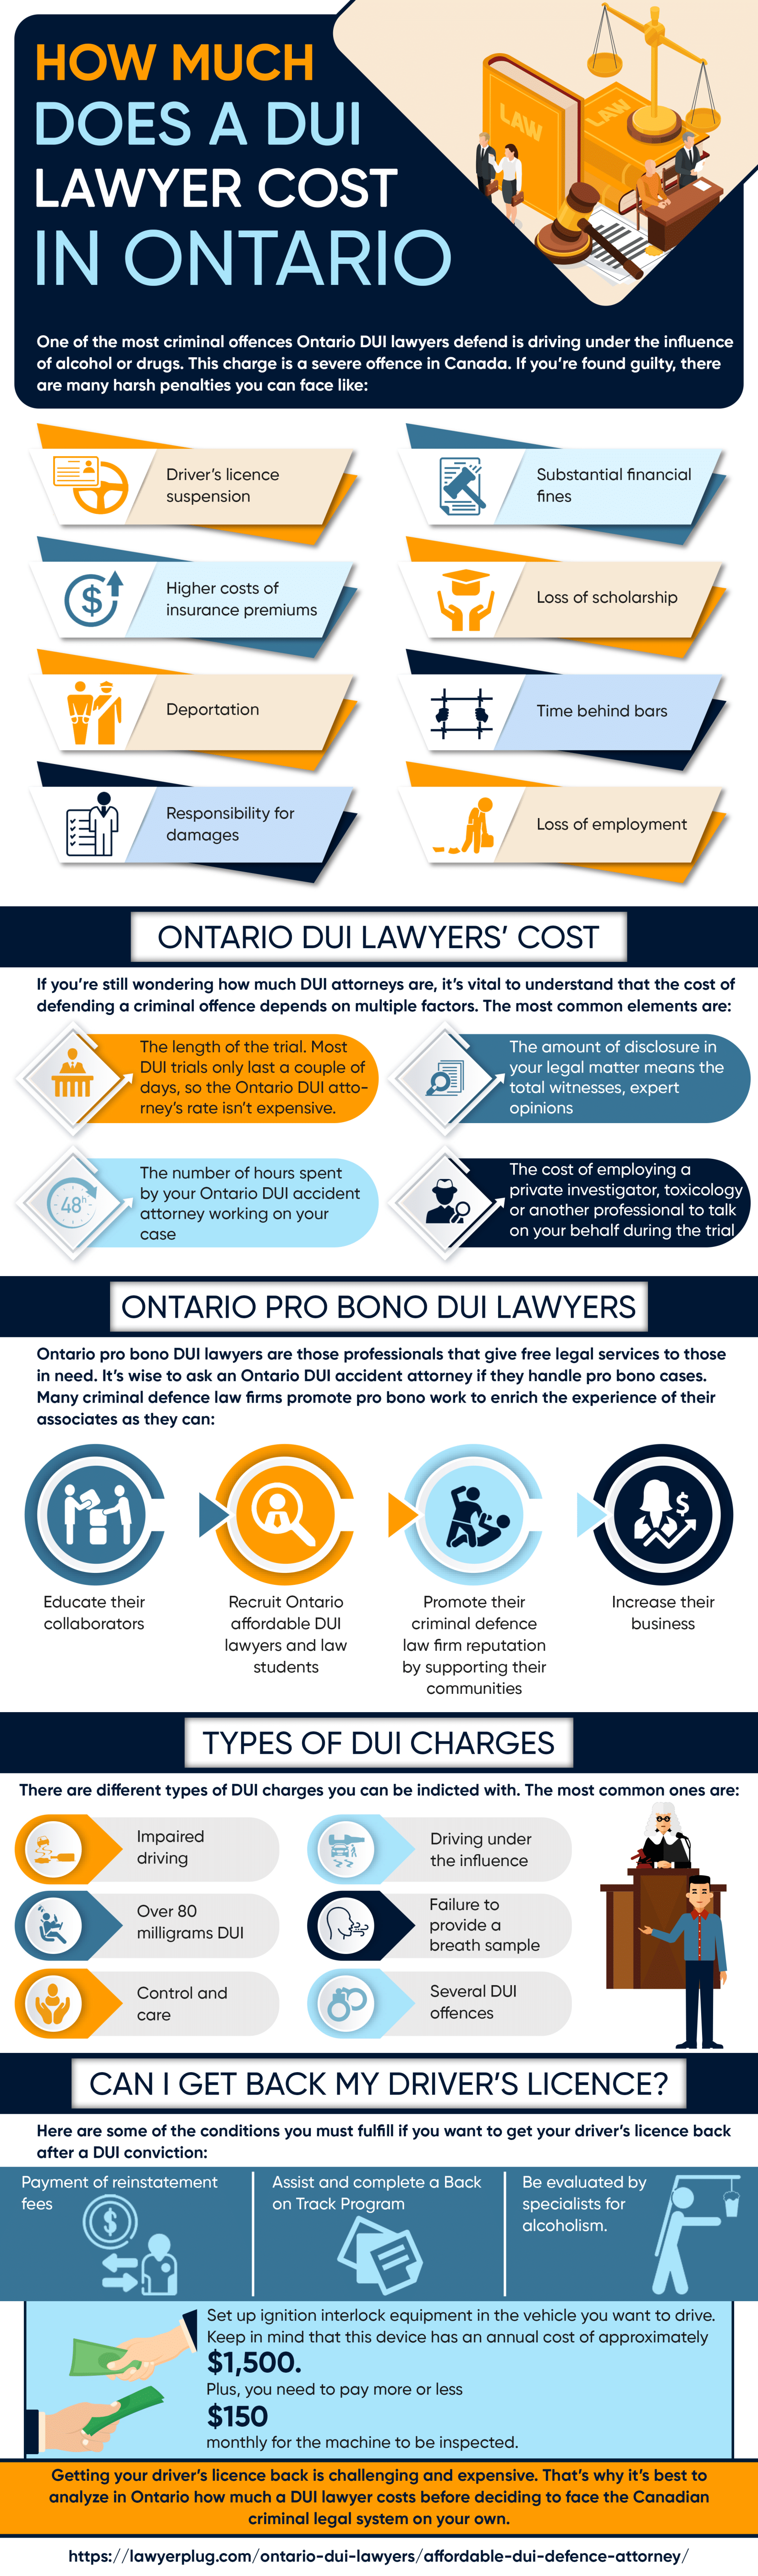 Learn more about finding the right Ontario DUI Lawyer for you and your budget. 